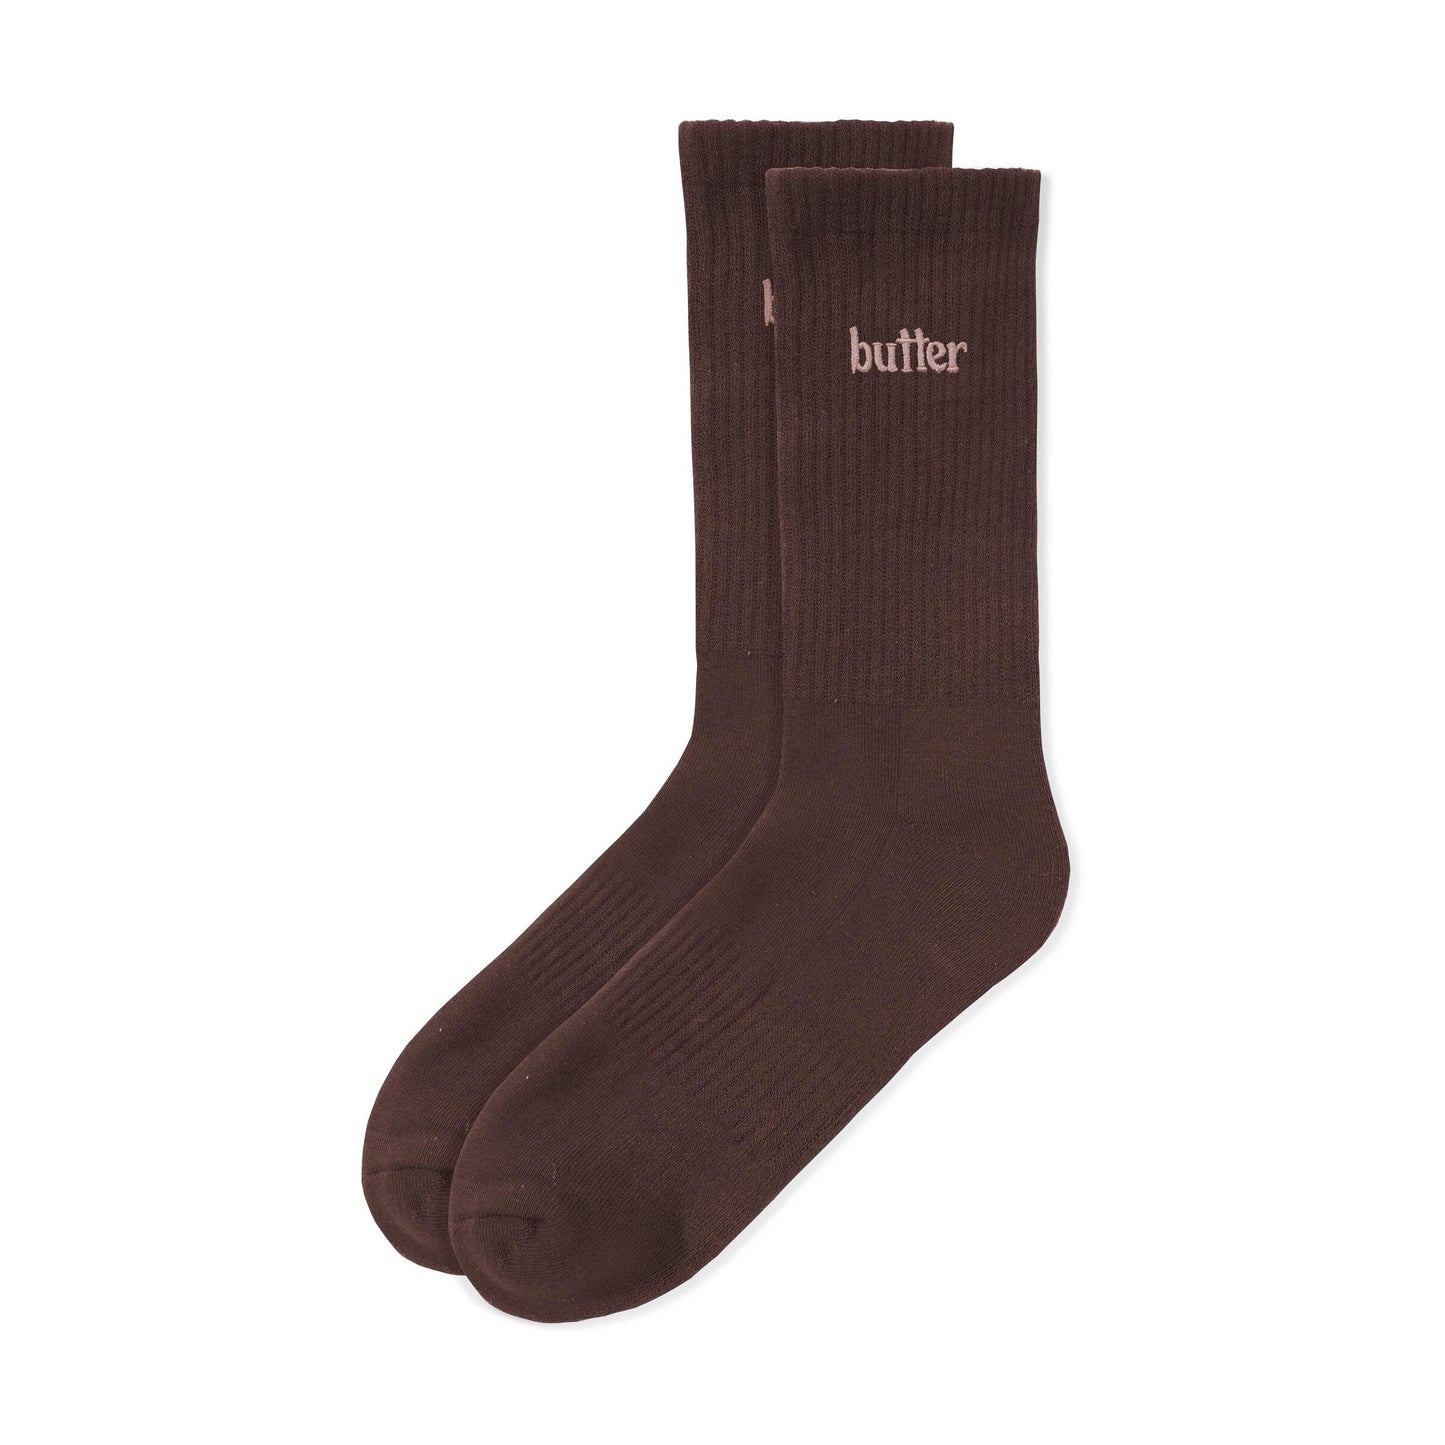 Butter Basic Socks SU'24: Assorted Colors